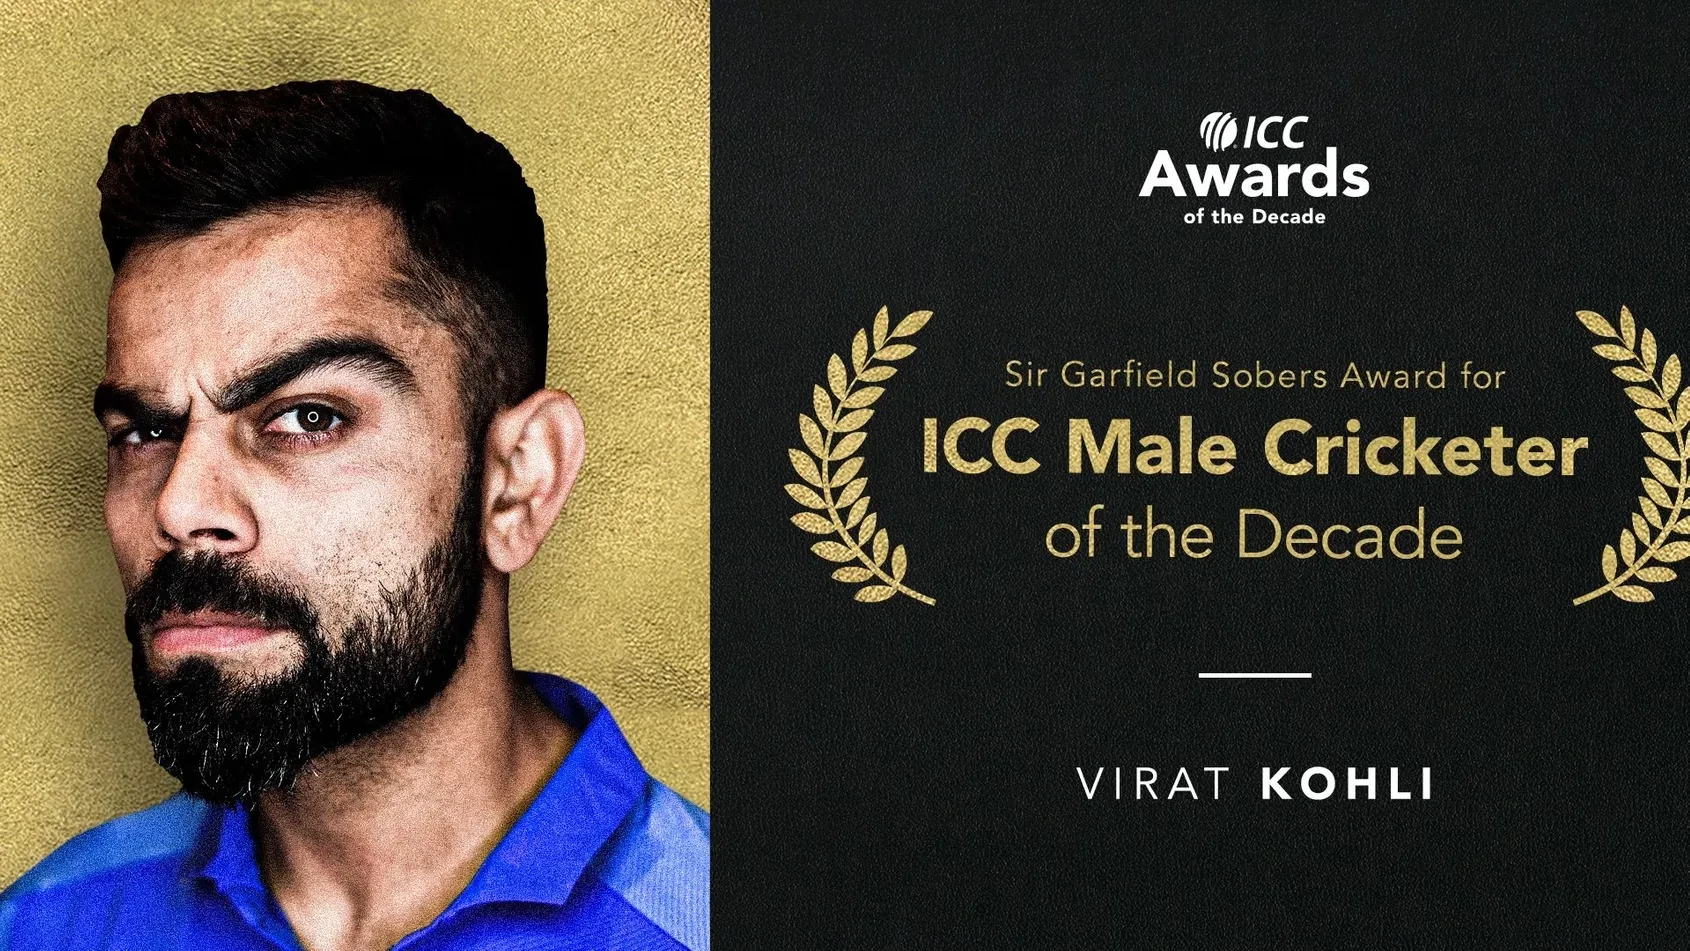 India's Virat Kohli claimed the top prize at the ICC awards of the decade ©Getty Images 